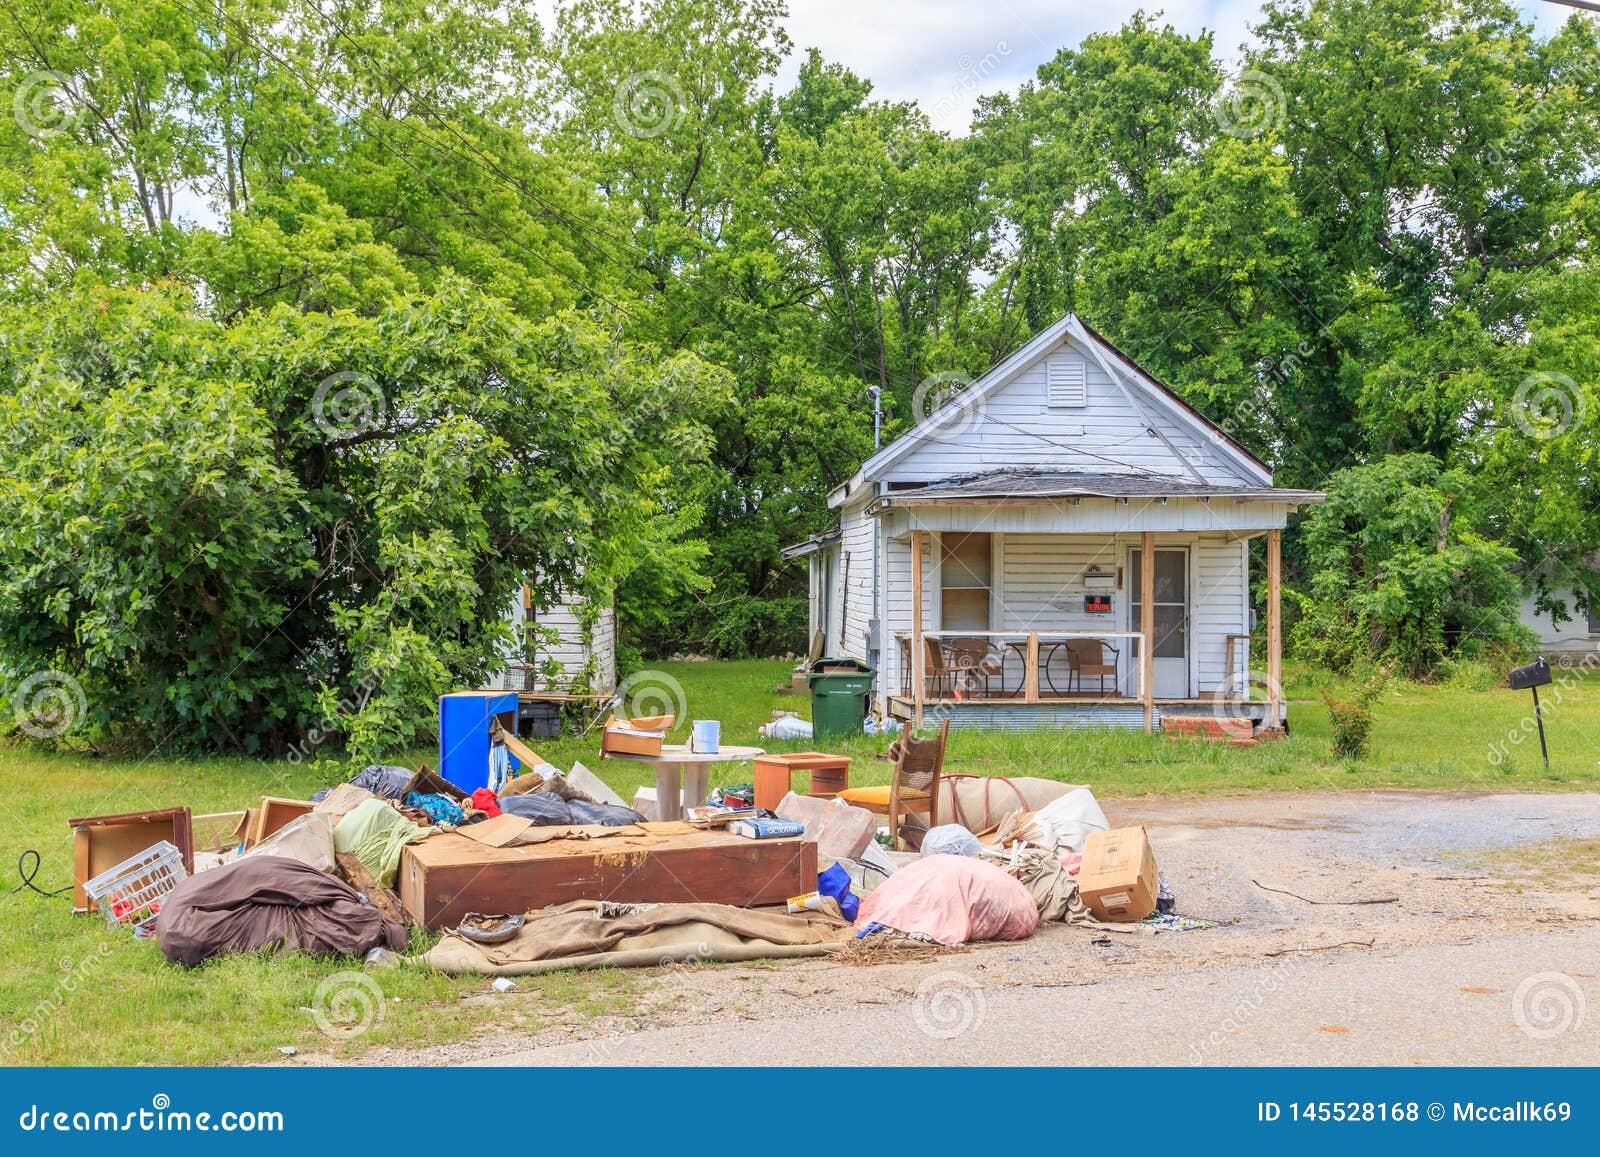 Abandoned Home With Trash On Lawn Stock Photo Image Of Embattled